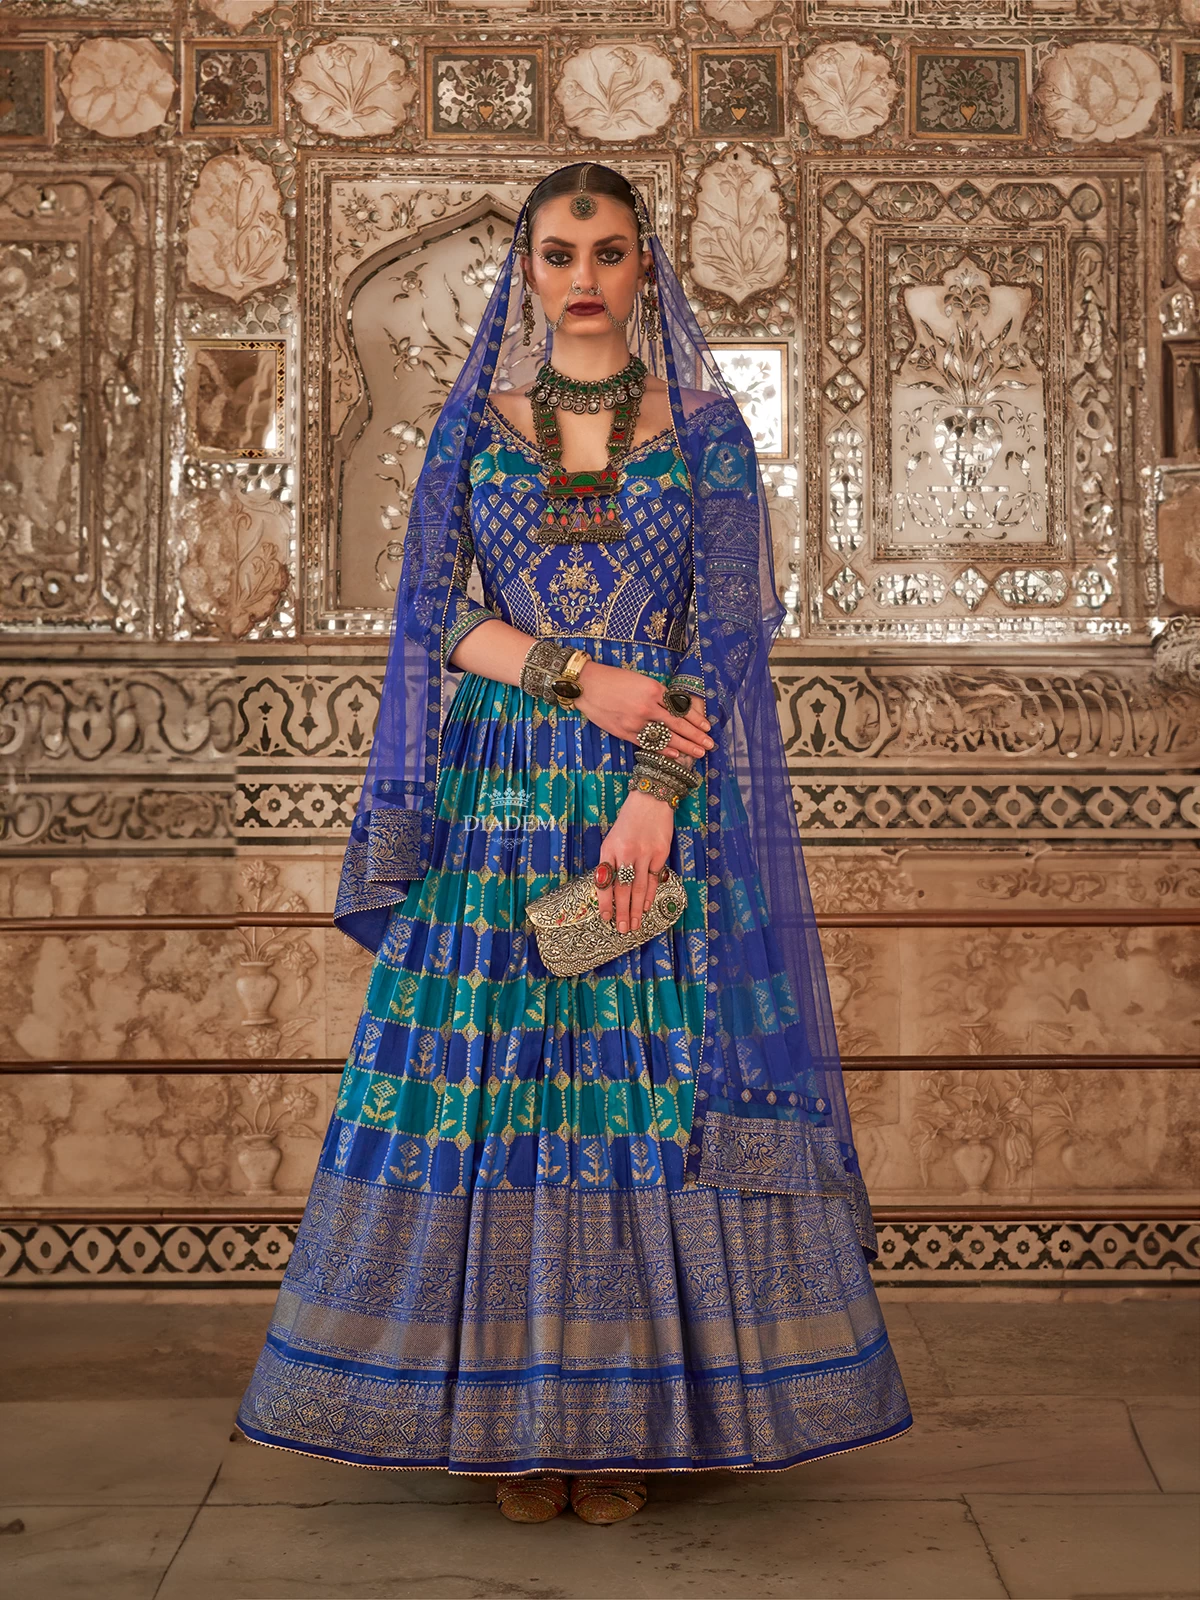 Royal Blue Silk Gown With Adorned With Prints And Embroideries, Paired With Dupatta